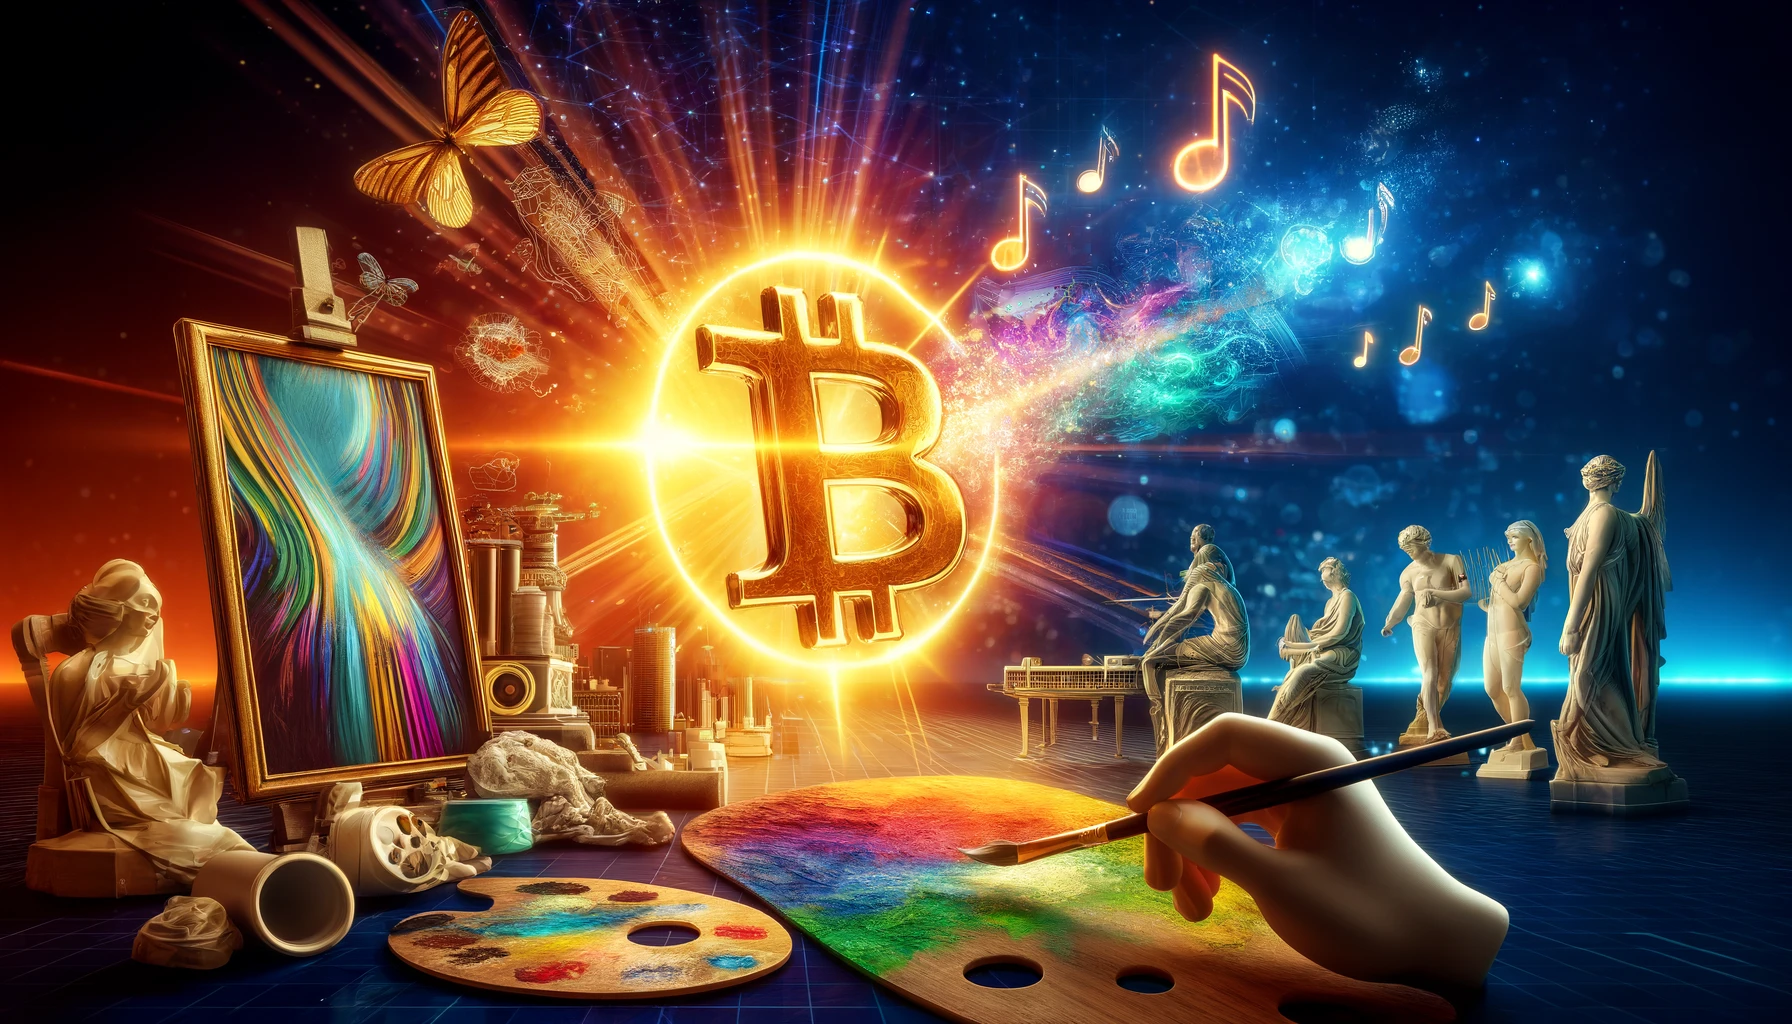 A vivid and dynamic scene blending the concepts of Bitcoin and art, set in a widescreen aspect ratio